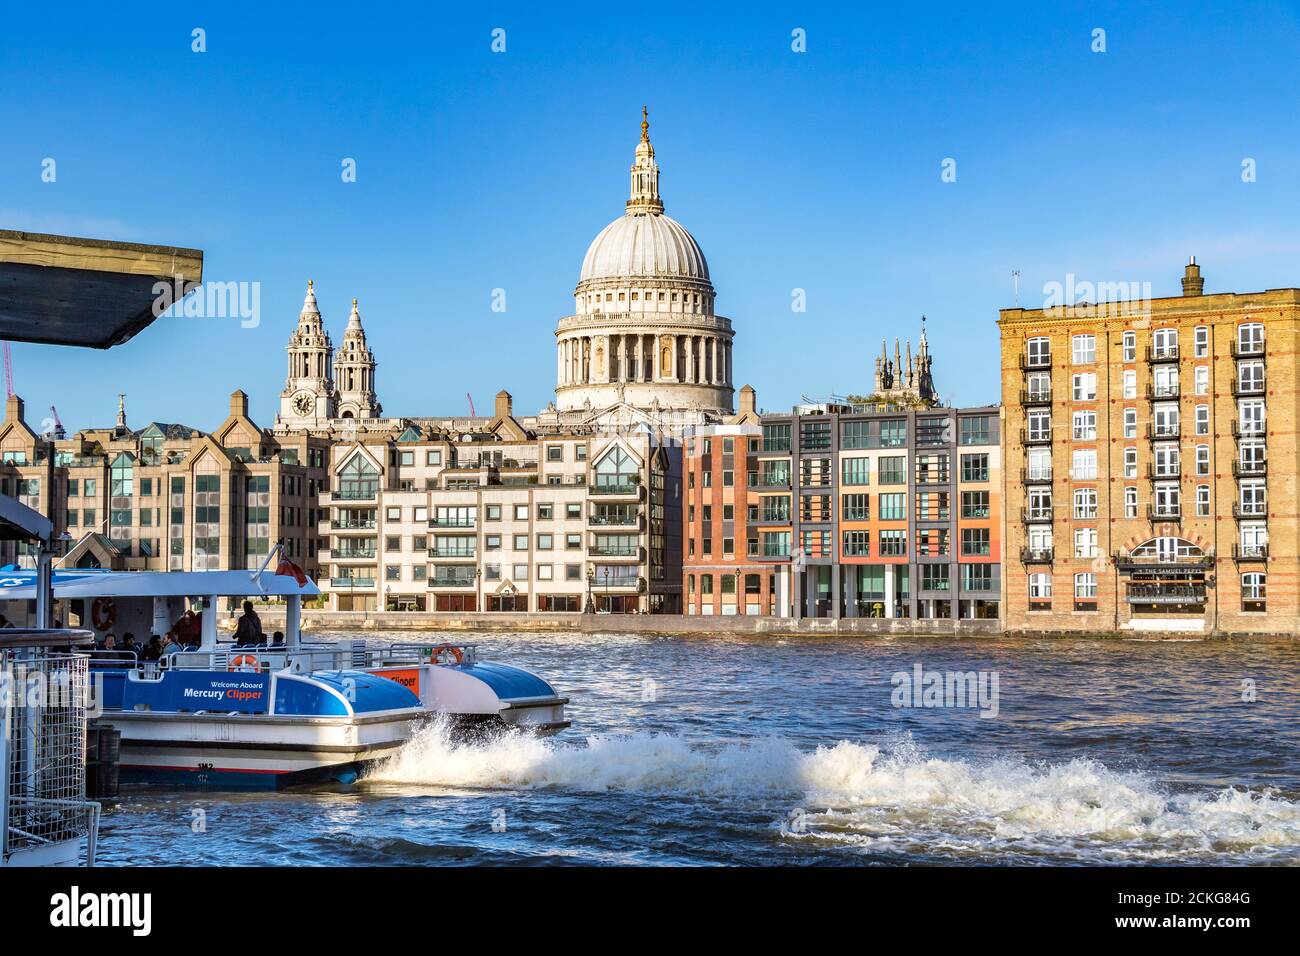 A Thames Clipper River Boat pulls up at Bankside River Boat stop with St. Paul's Cathedral and it's iconic dome in the background ,London ,UK Stock Photo